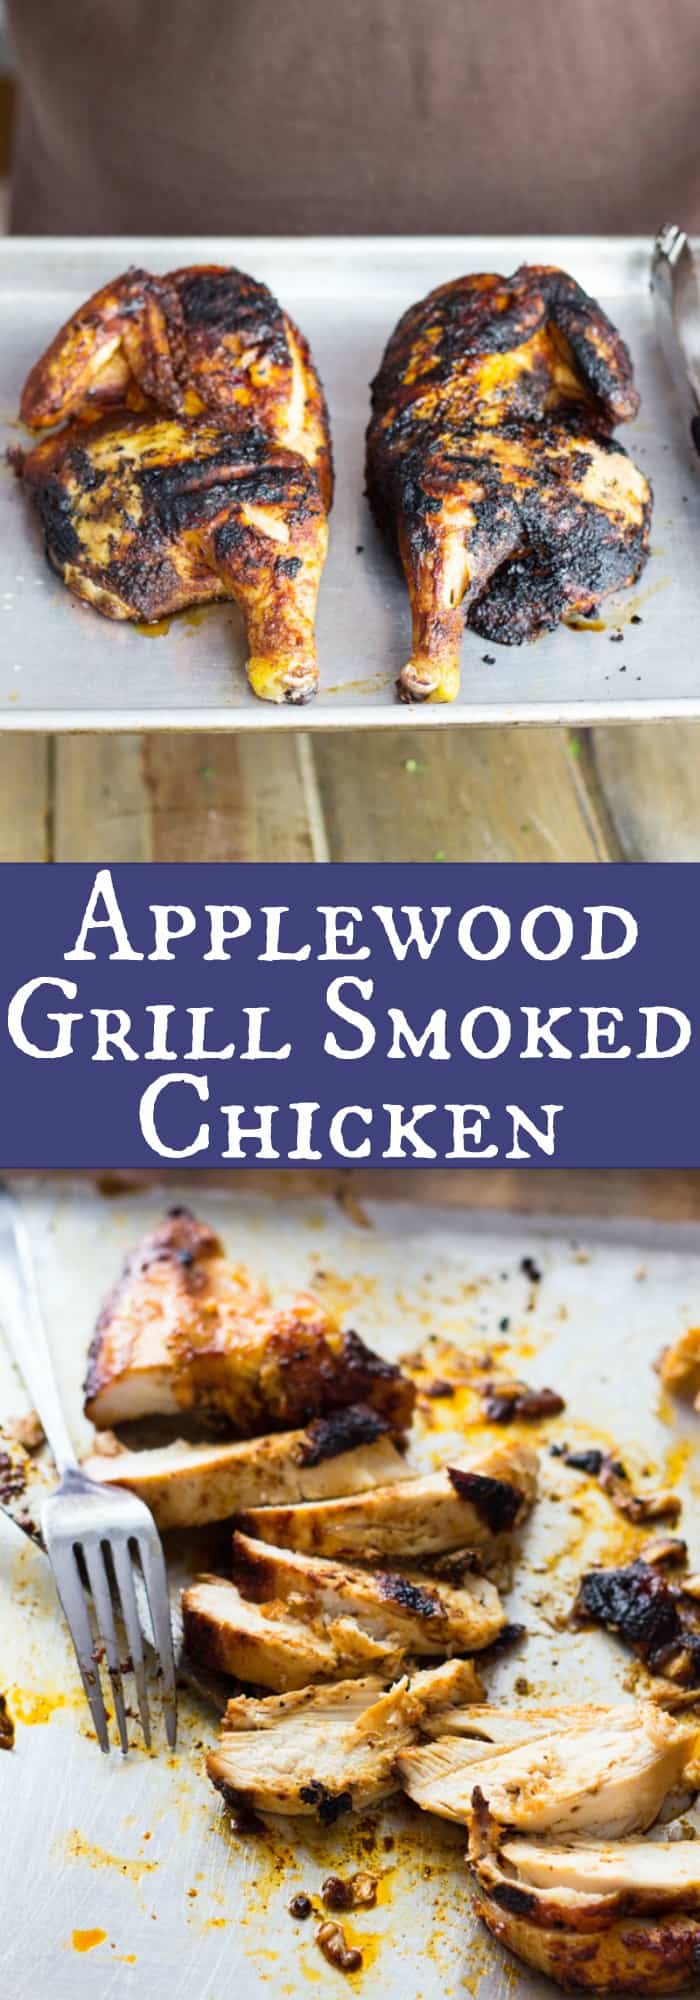 Applewood Grill Smoked Chicken -the applewood provides a mild smokiness and the dry rub gives hints of sweetness for a perfectly juicy chicken. | www.countrysidecravings.com 